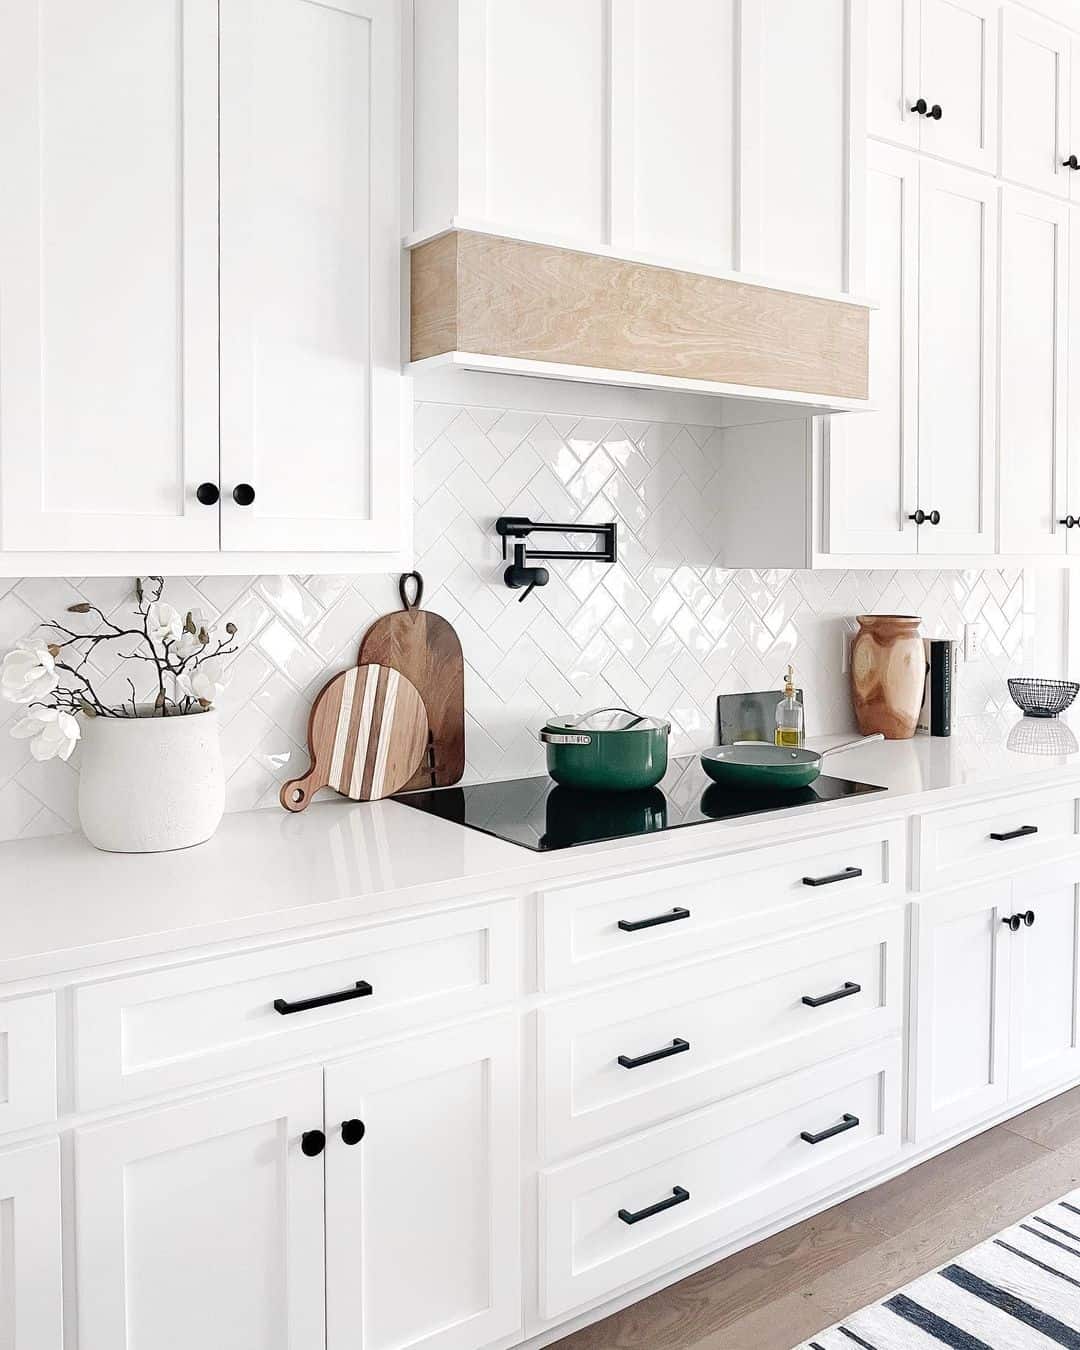 16 Simple Ways To Add Character With White Herringbone Tiles